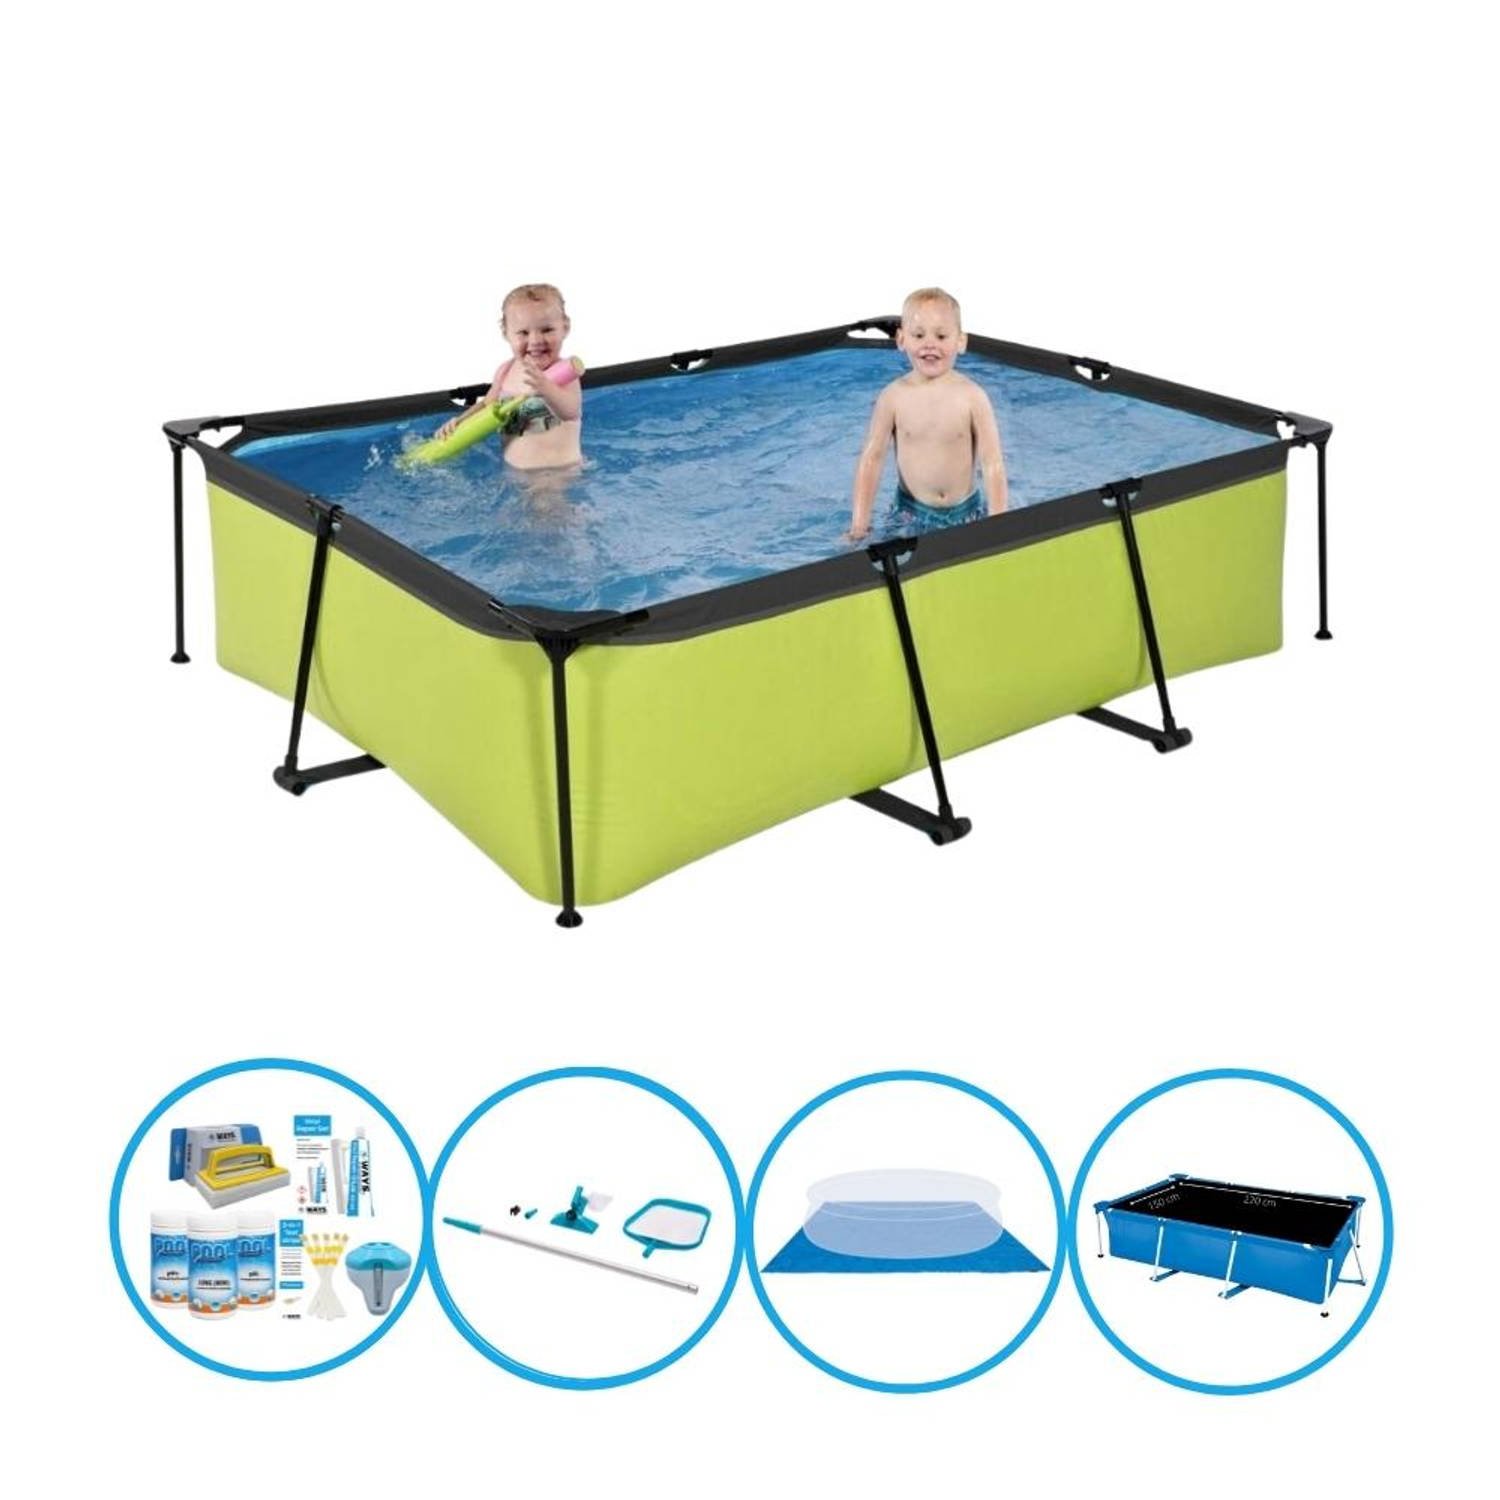 EXIT Zwembad Lime - Frame Pool 220x150x60 cm - Zwembad Deal